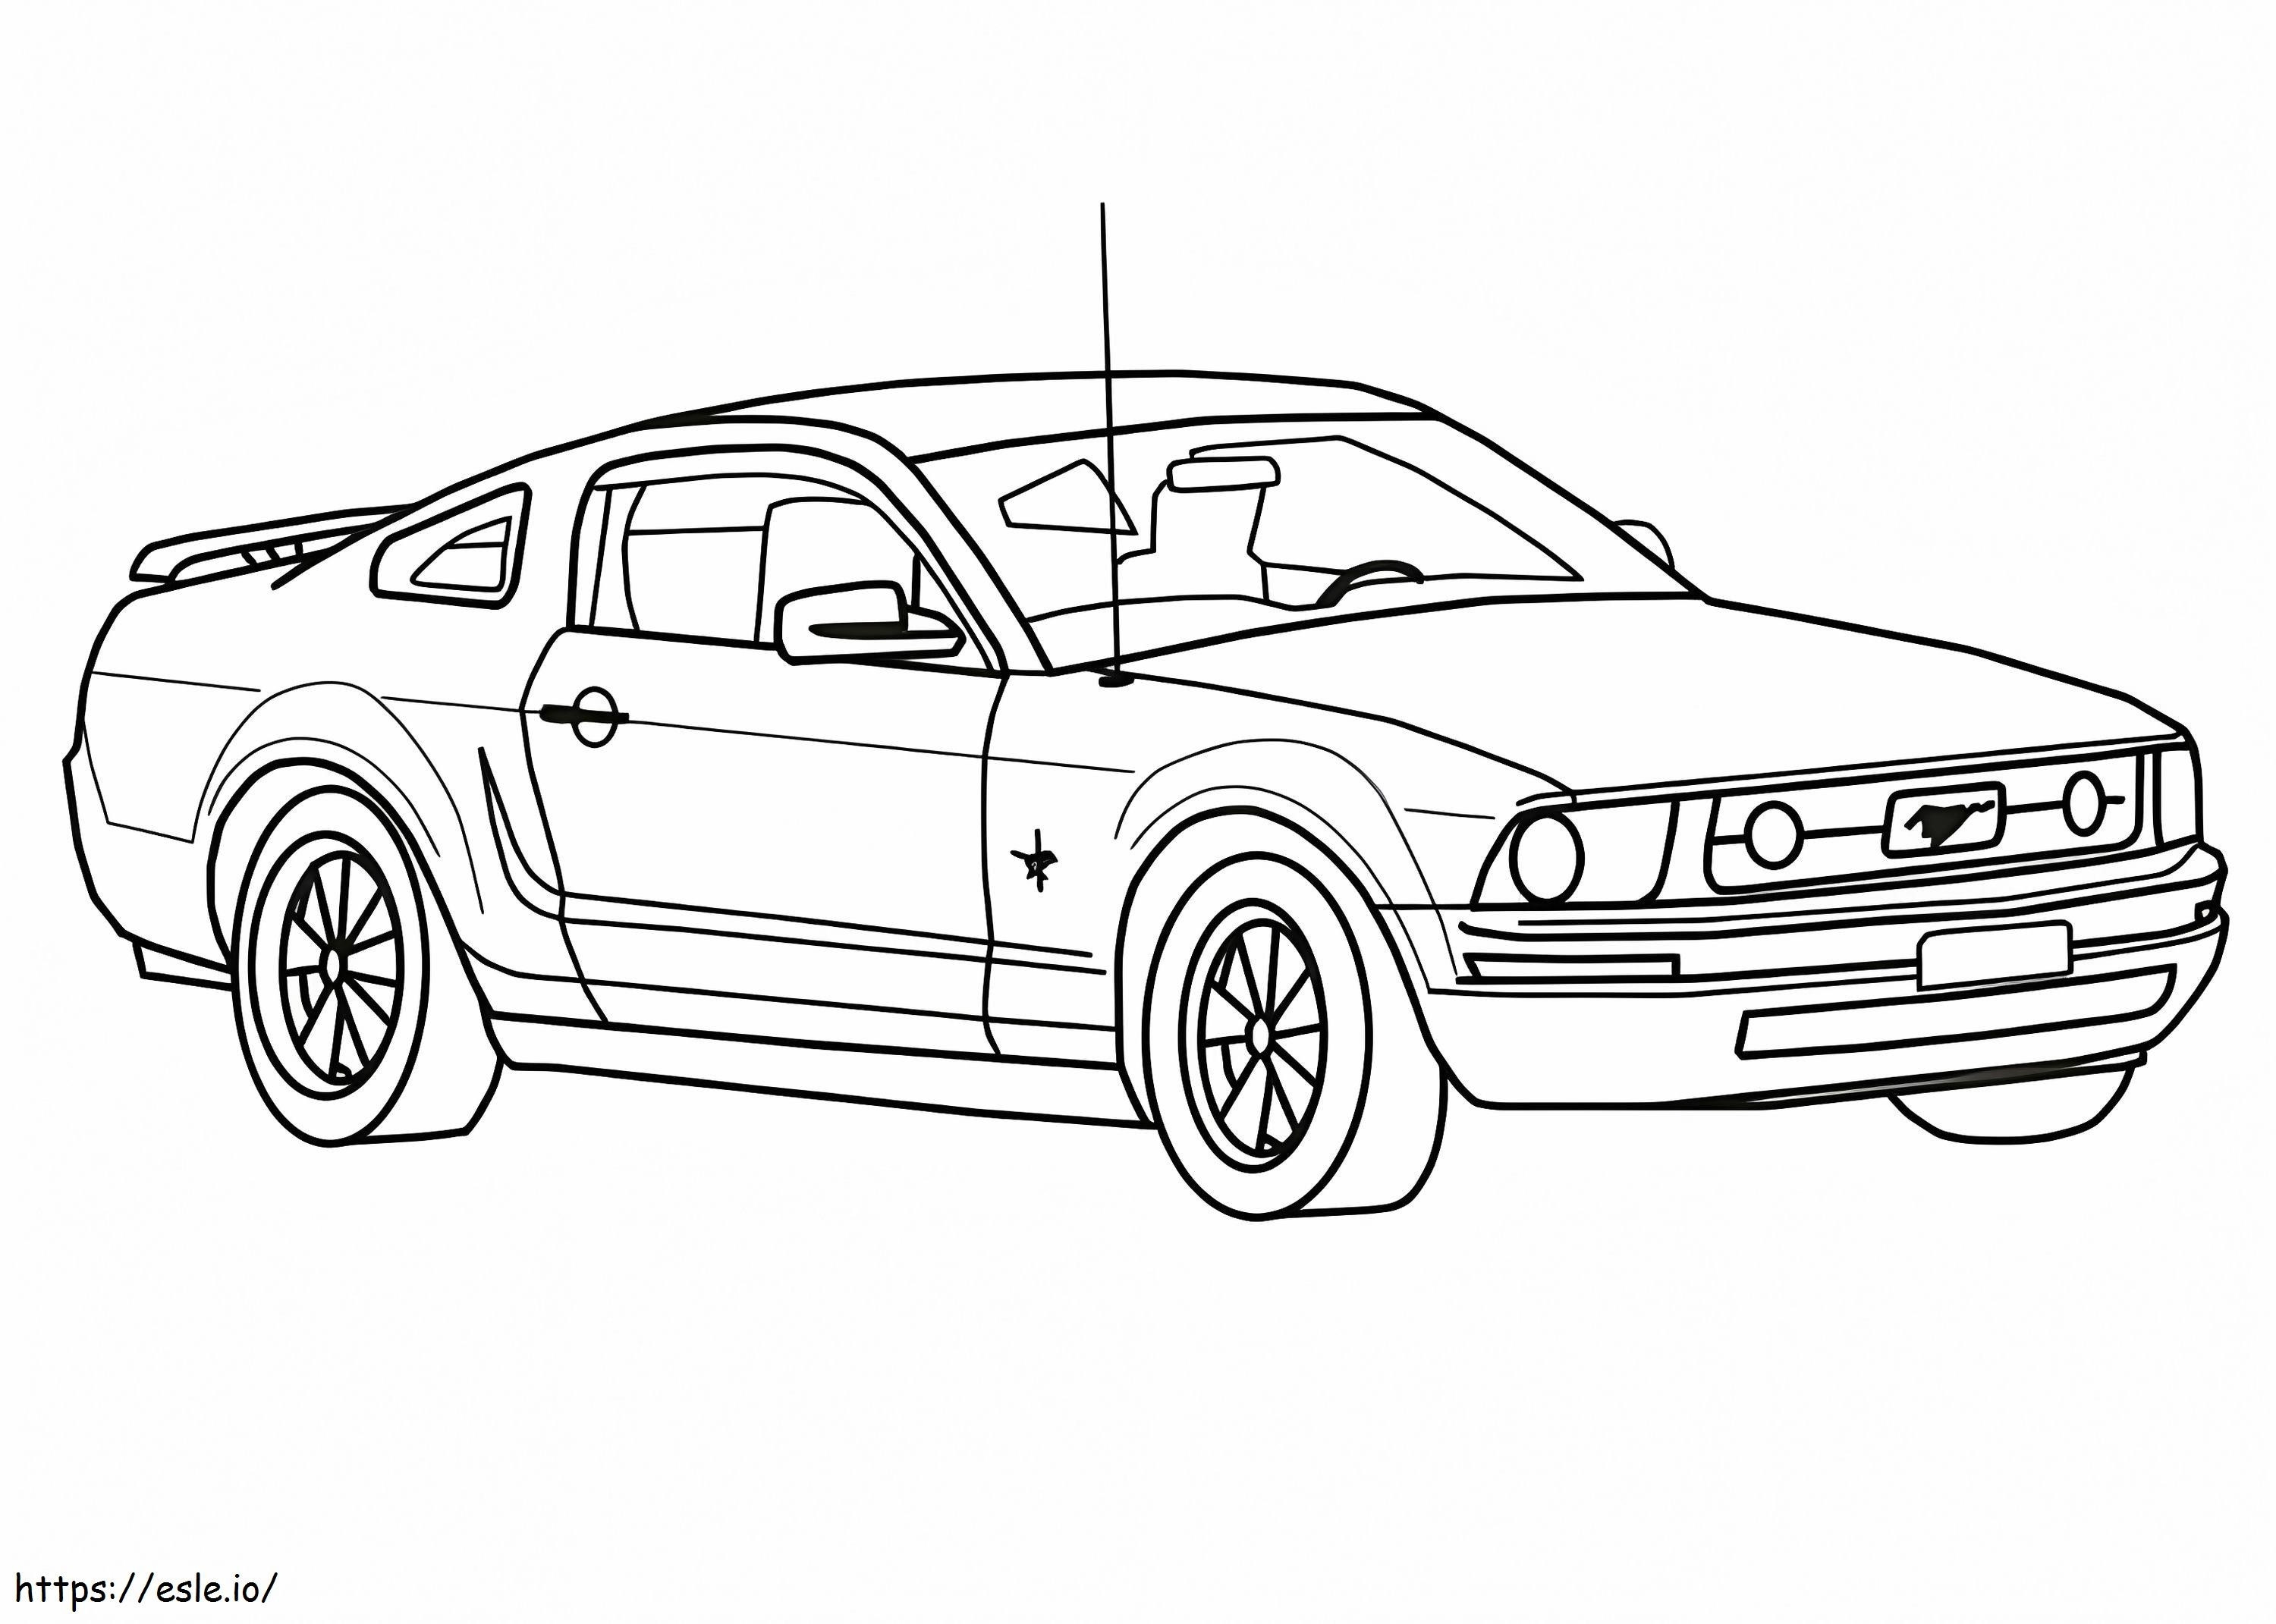 Cool Mustang coloring page